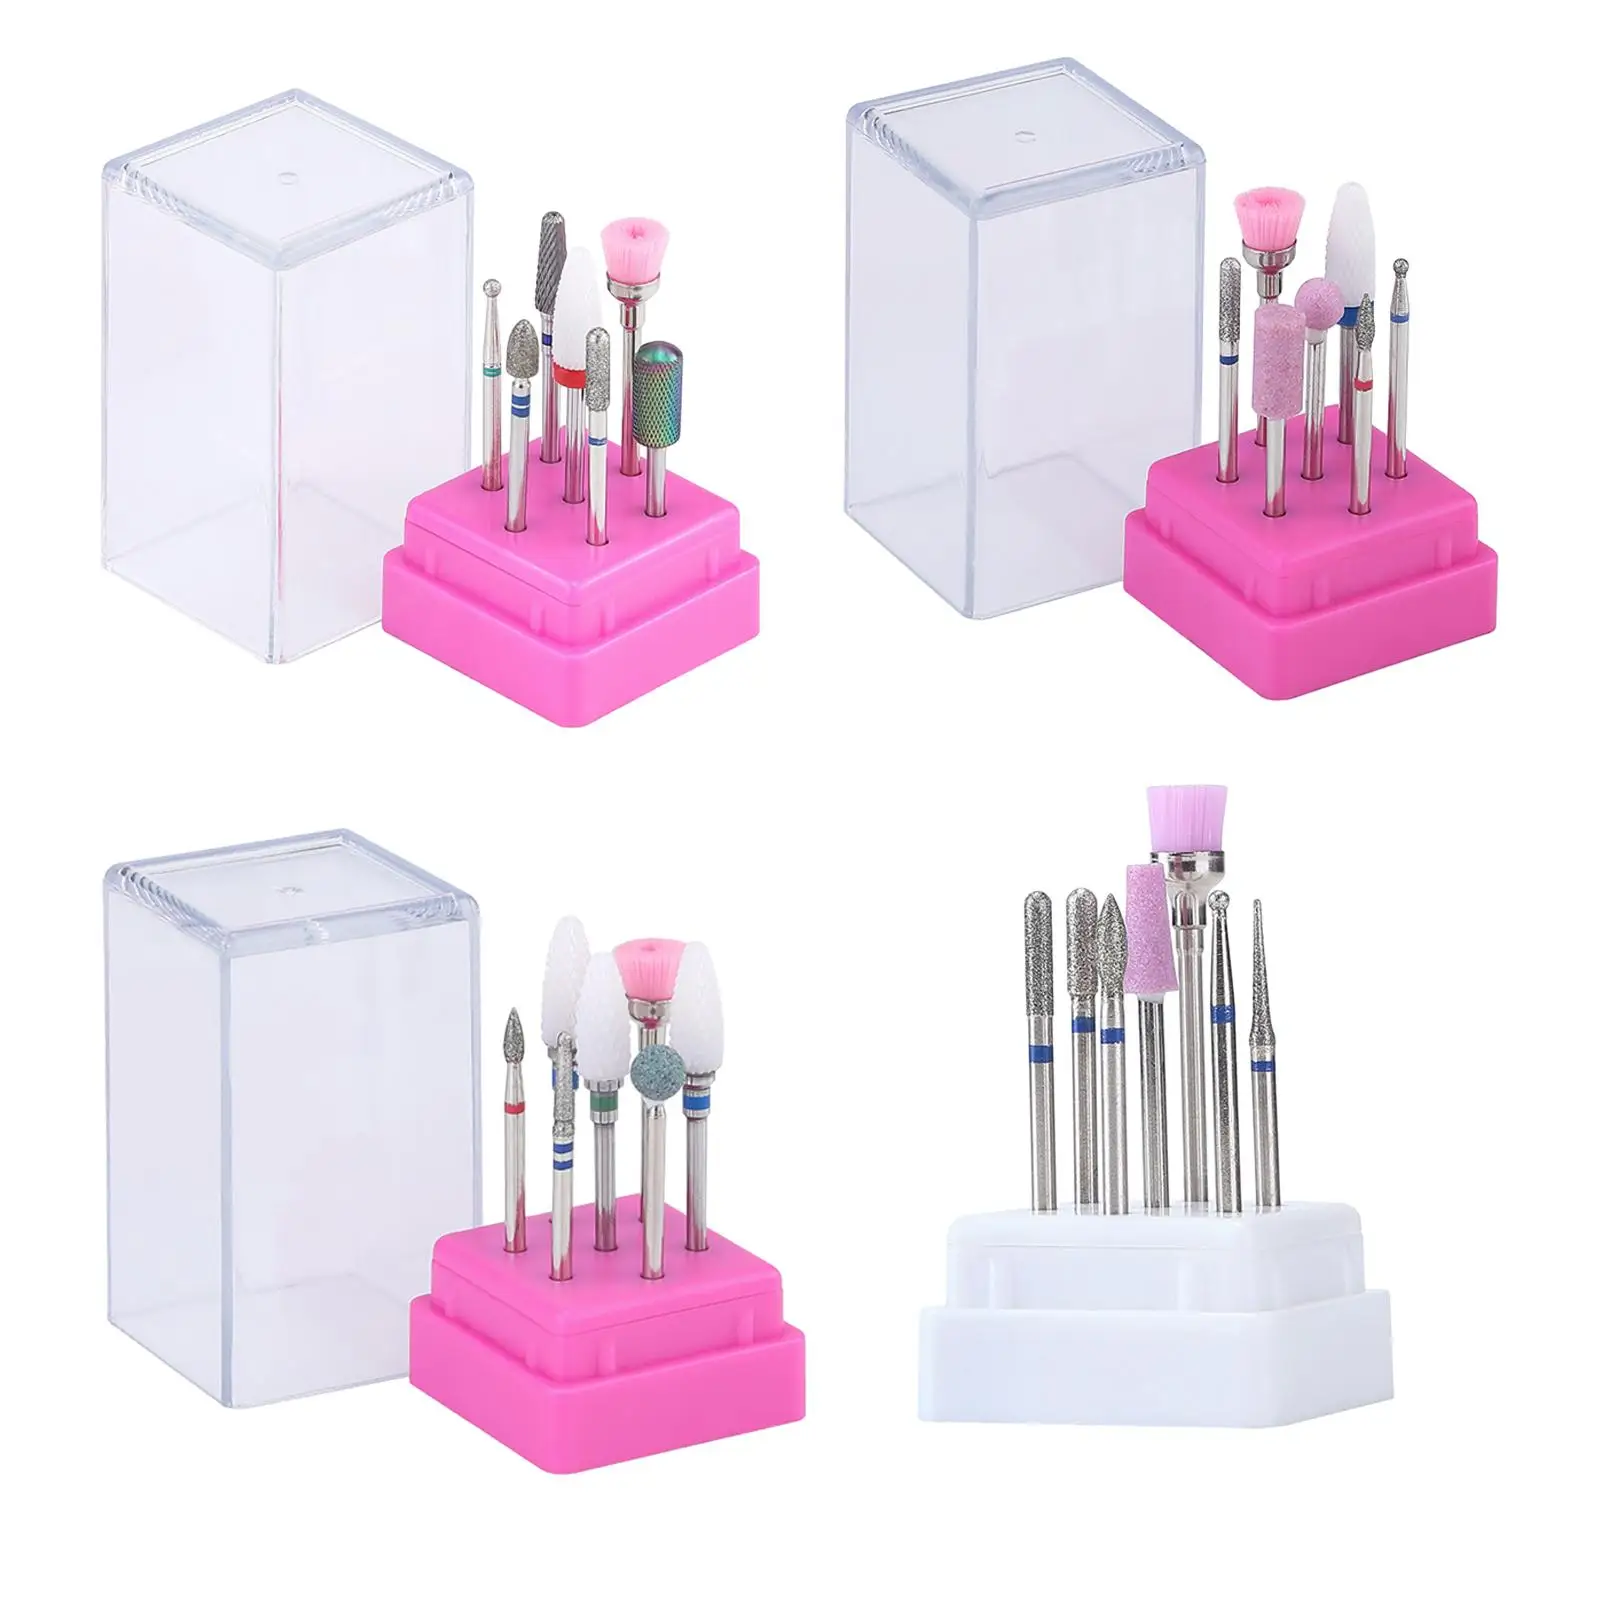 Electric Nail Drill Bits Kit with Holder Box Professional 7x Polishing File Grinding Heads for Sculpt Nail Polish Professionals